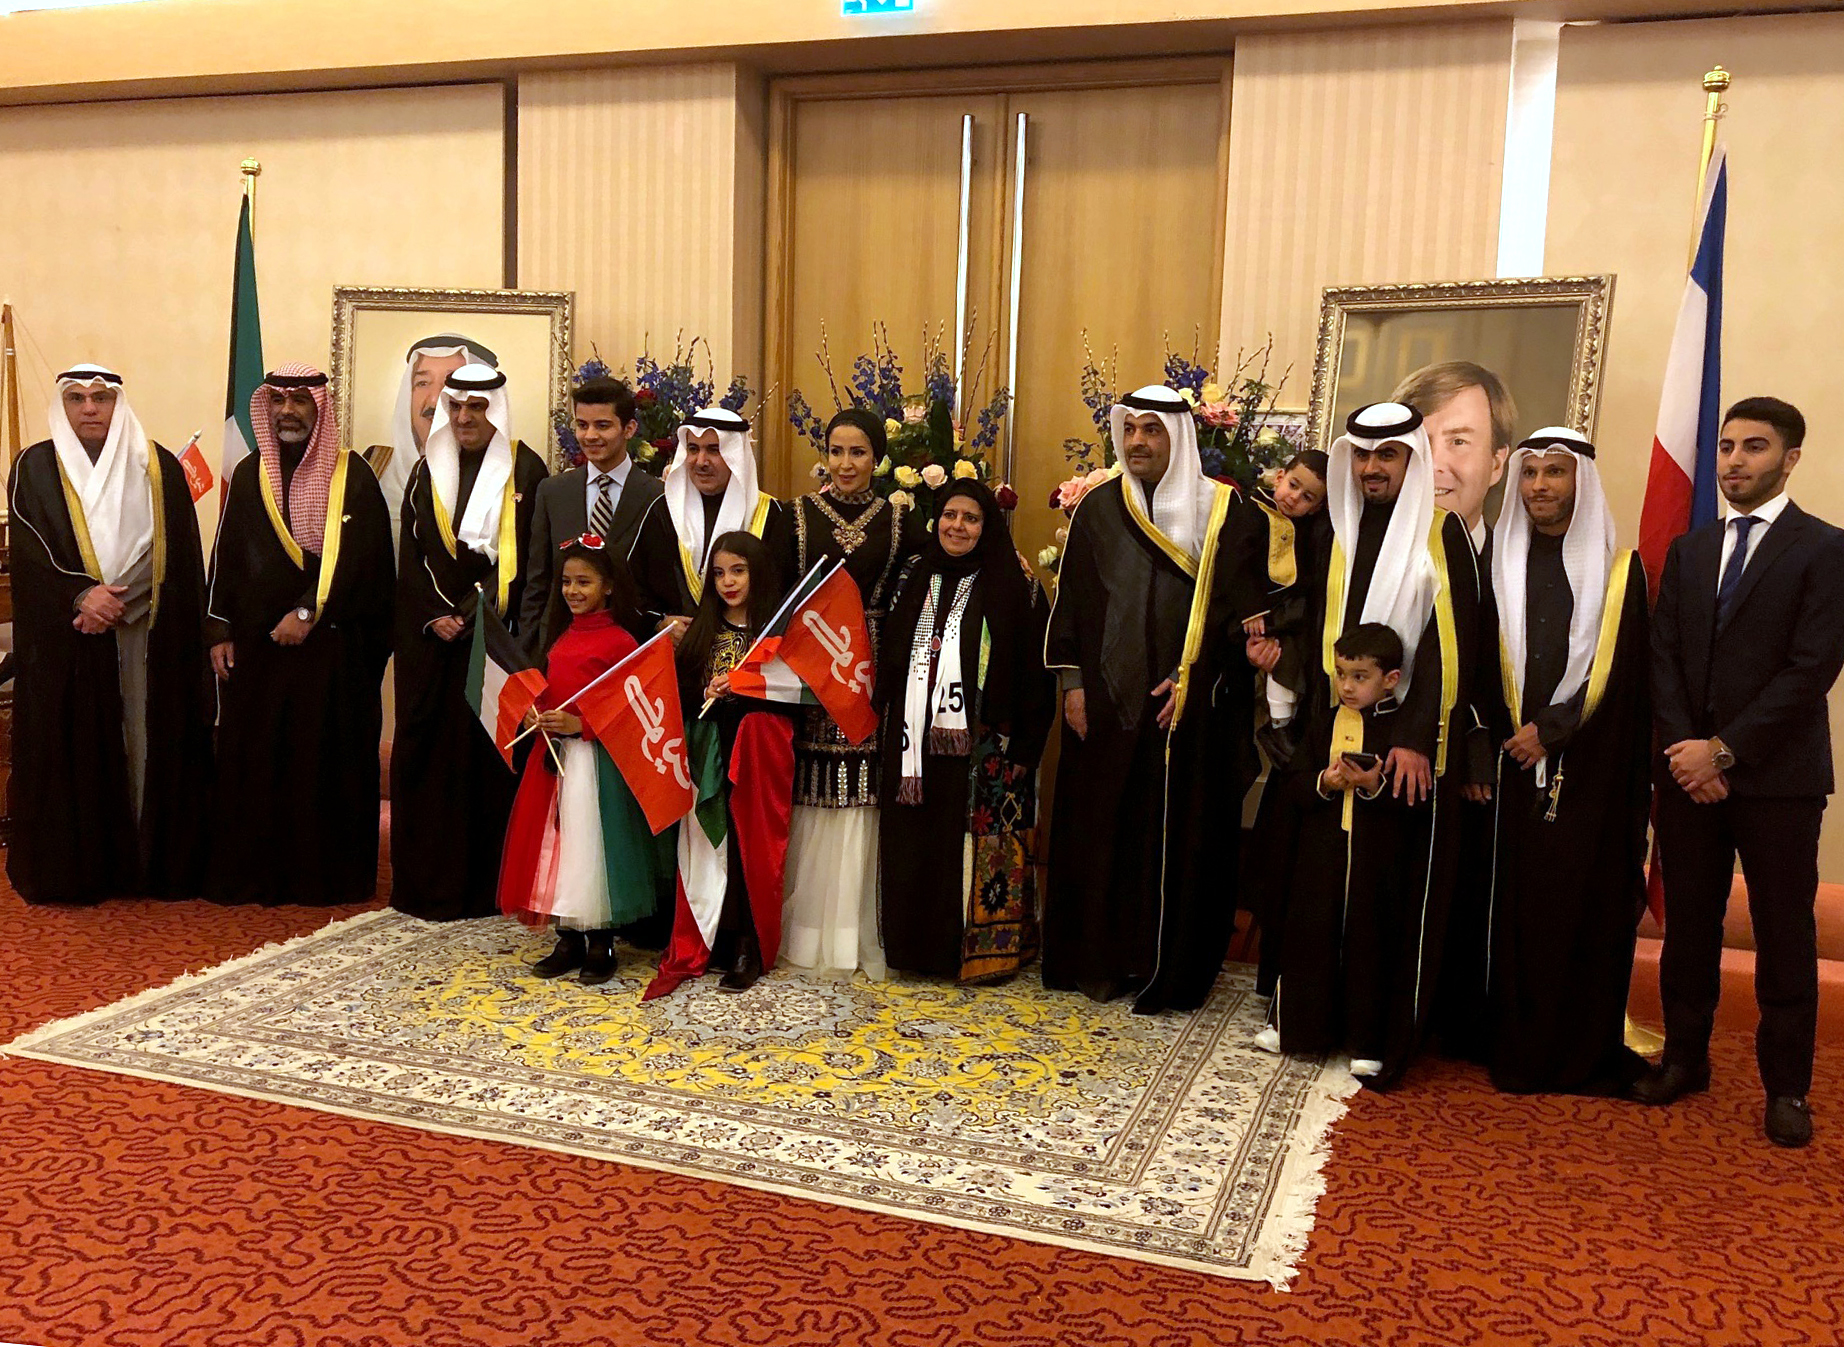 Kuwait embassy in the Netherlands celebrated the 58th National Day and 28th Anniversary of Liberation Day